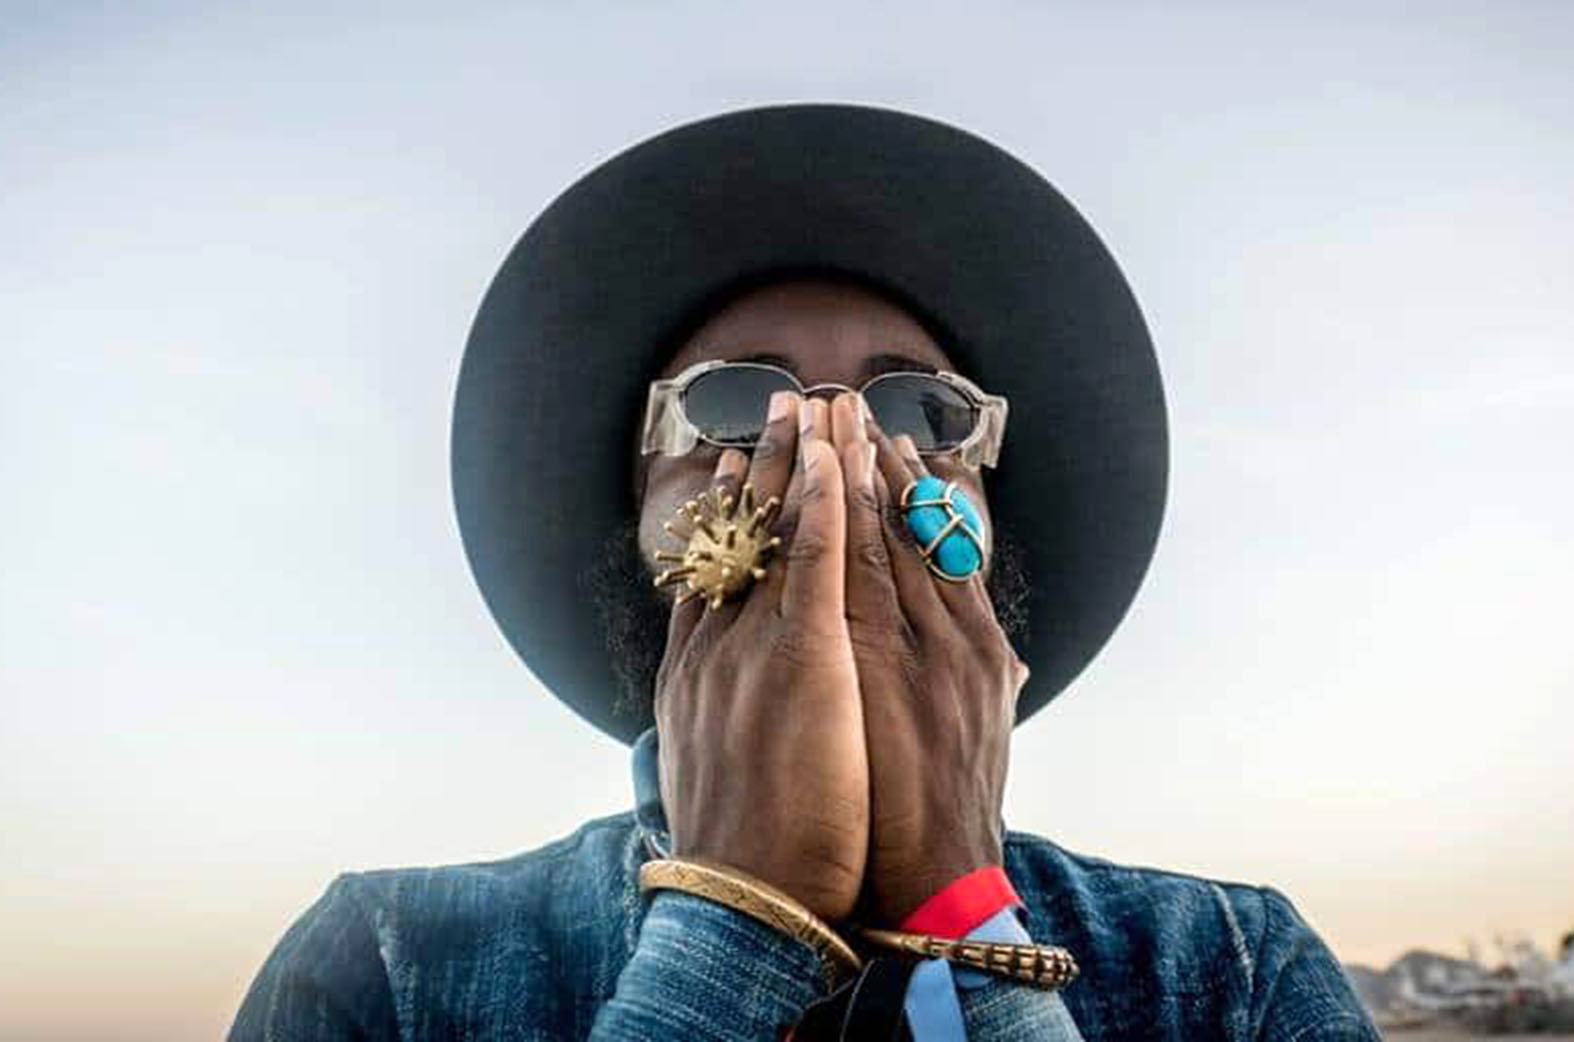 M.anifest to premiere new video on MTV Base's IG TV